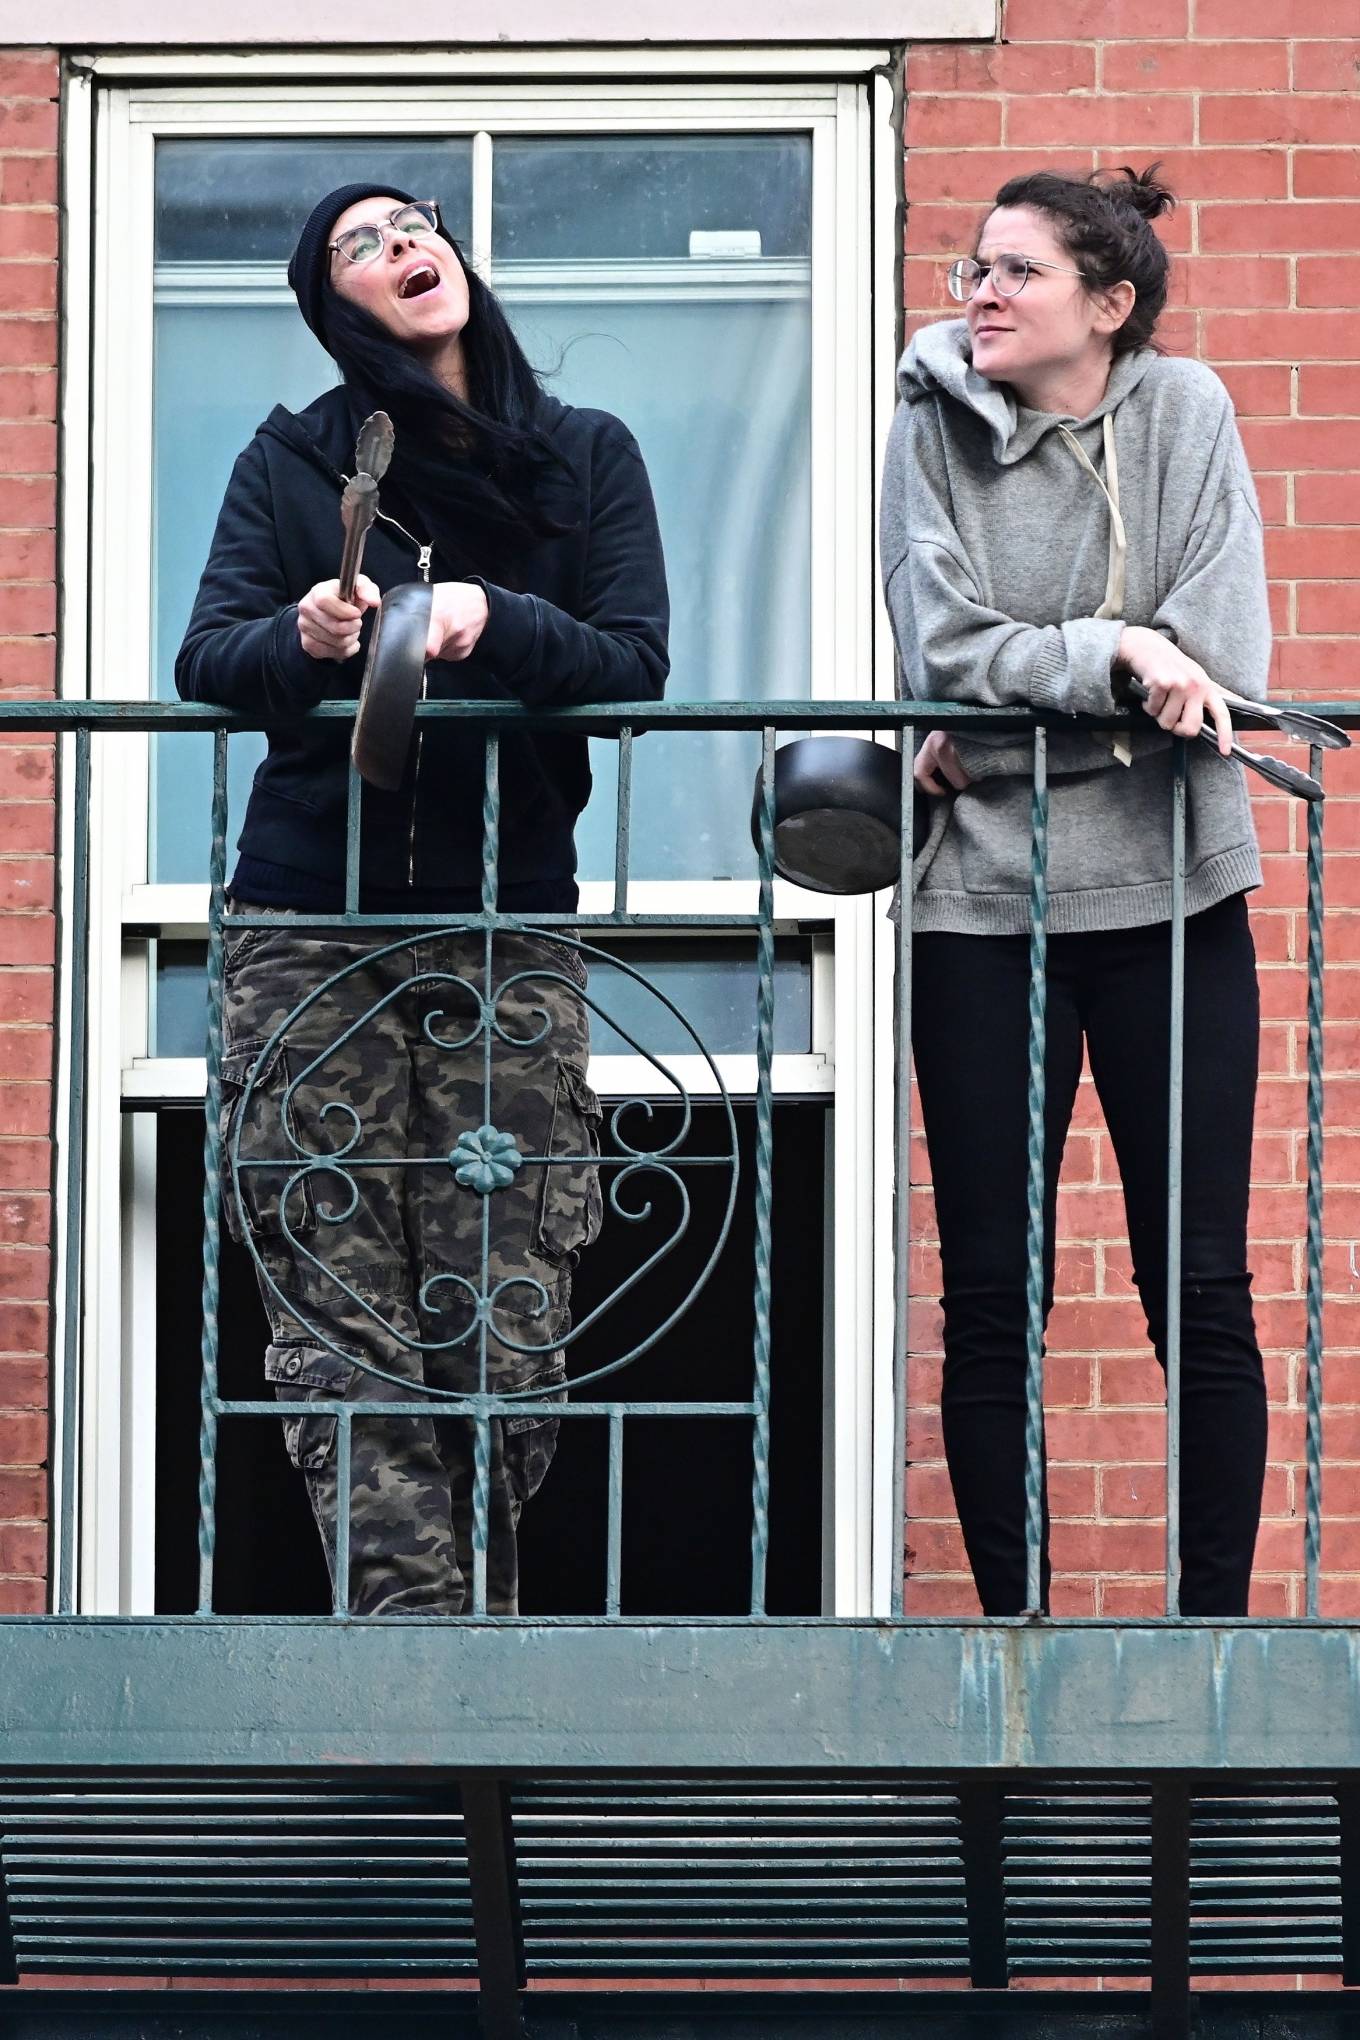 Sarah Silverman â€“ Walking out to her balcony in New York